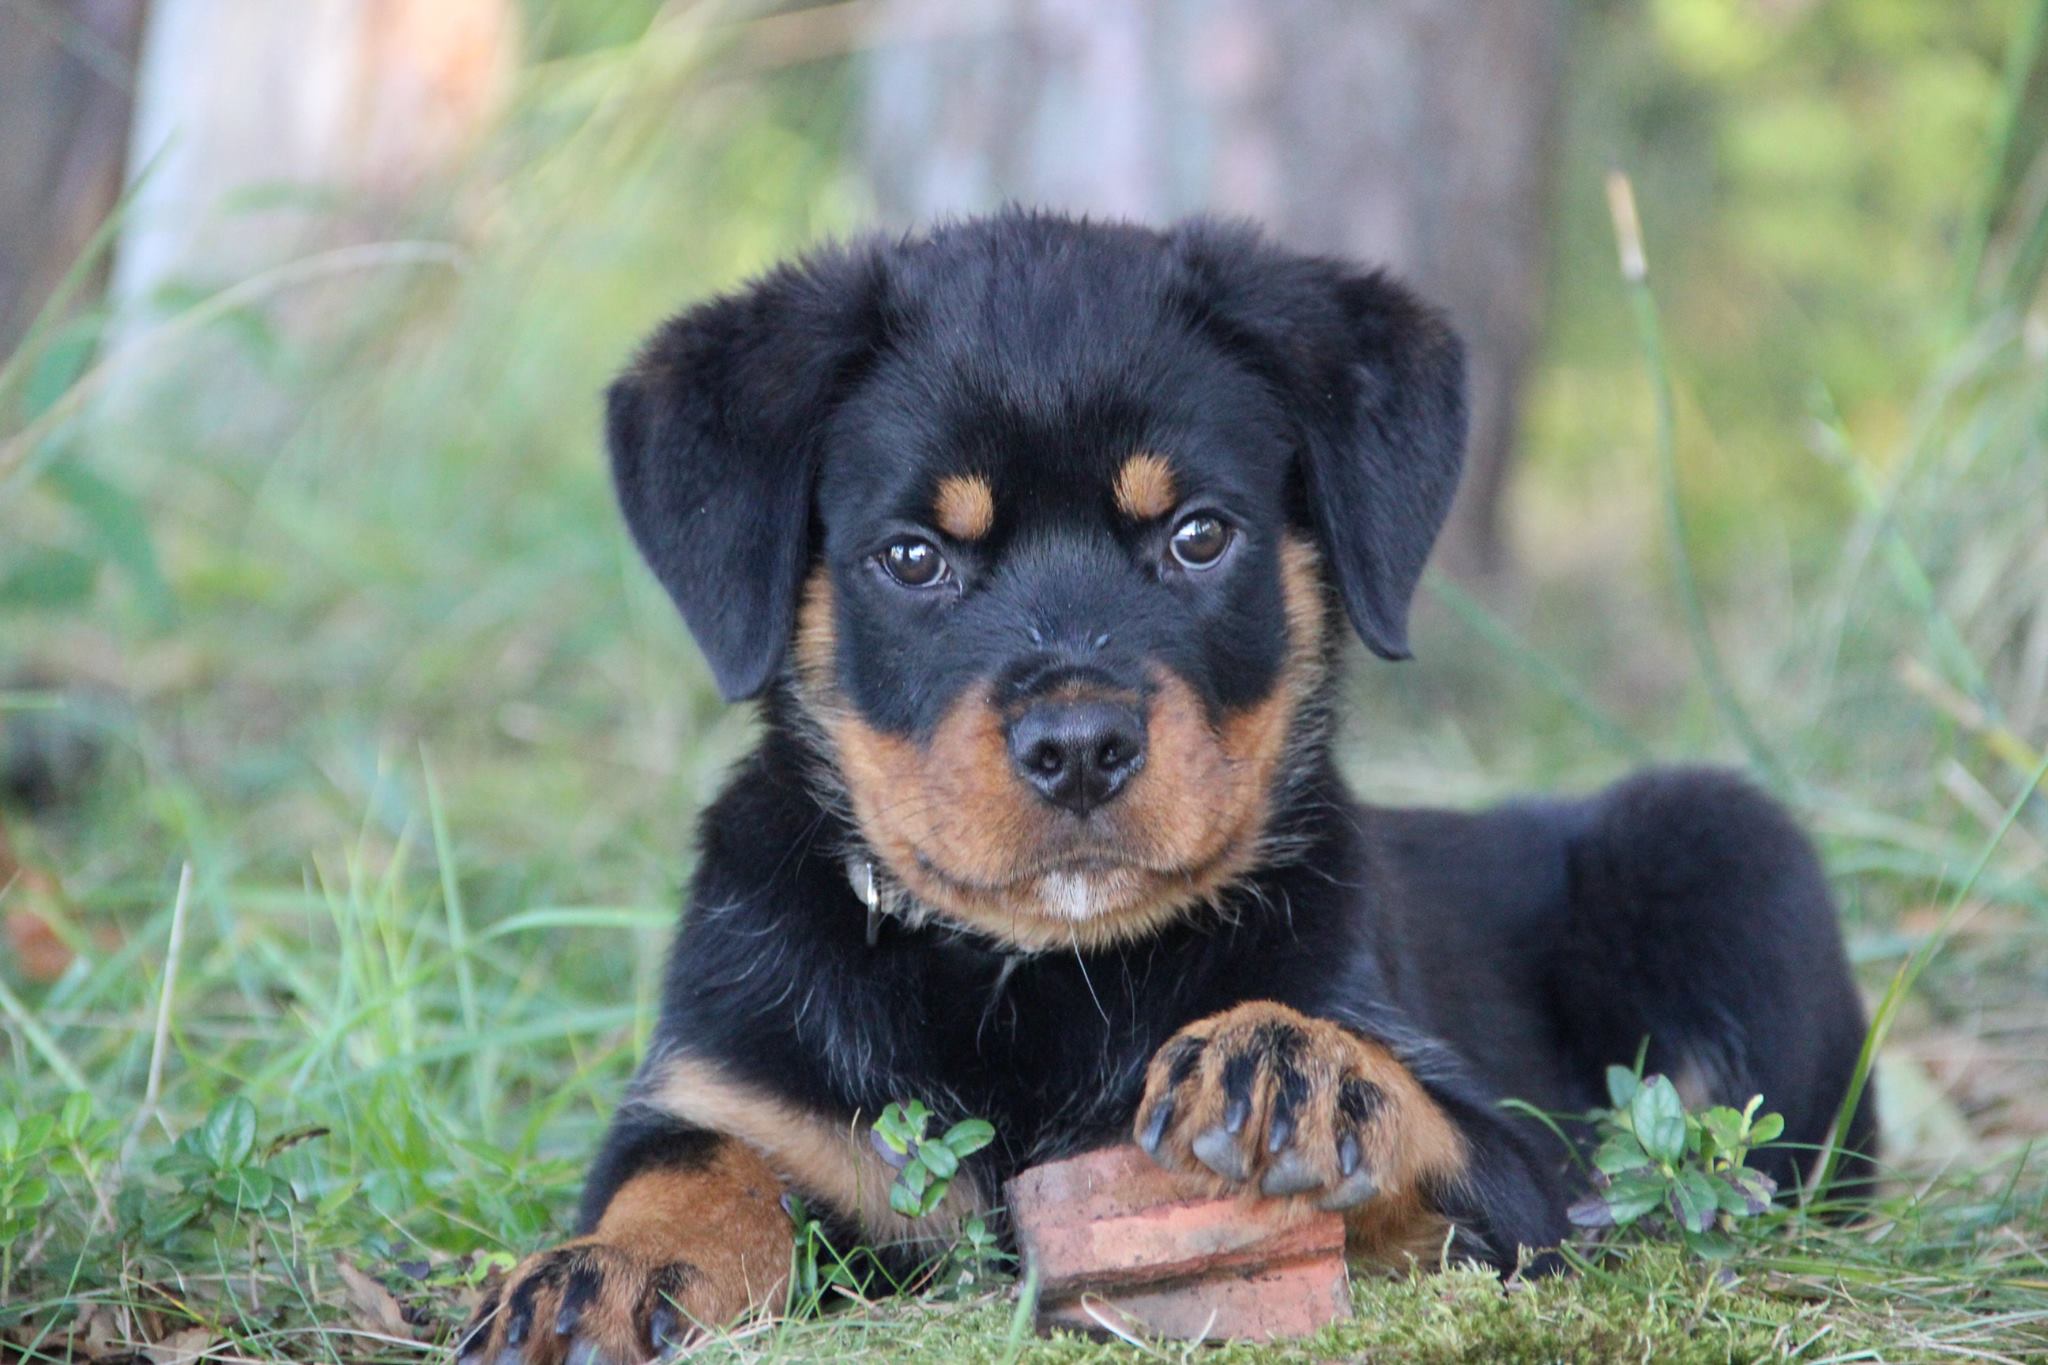 Rottweiler puppy lying on the grass in the forest